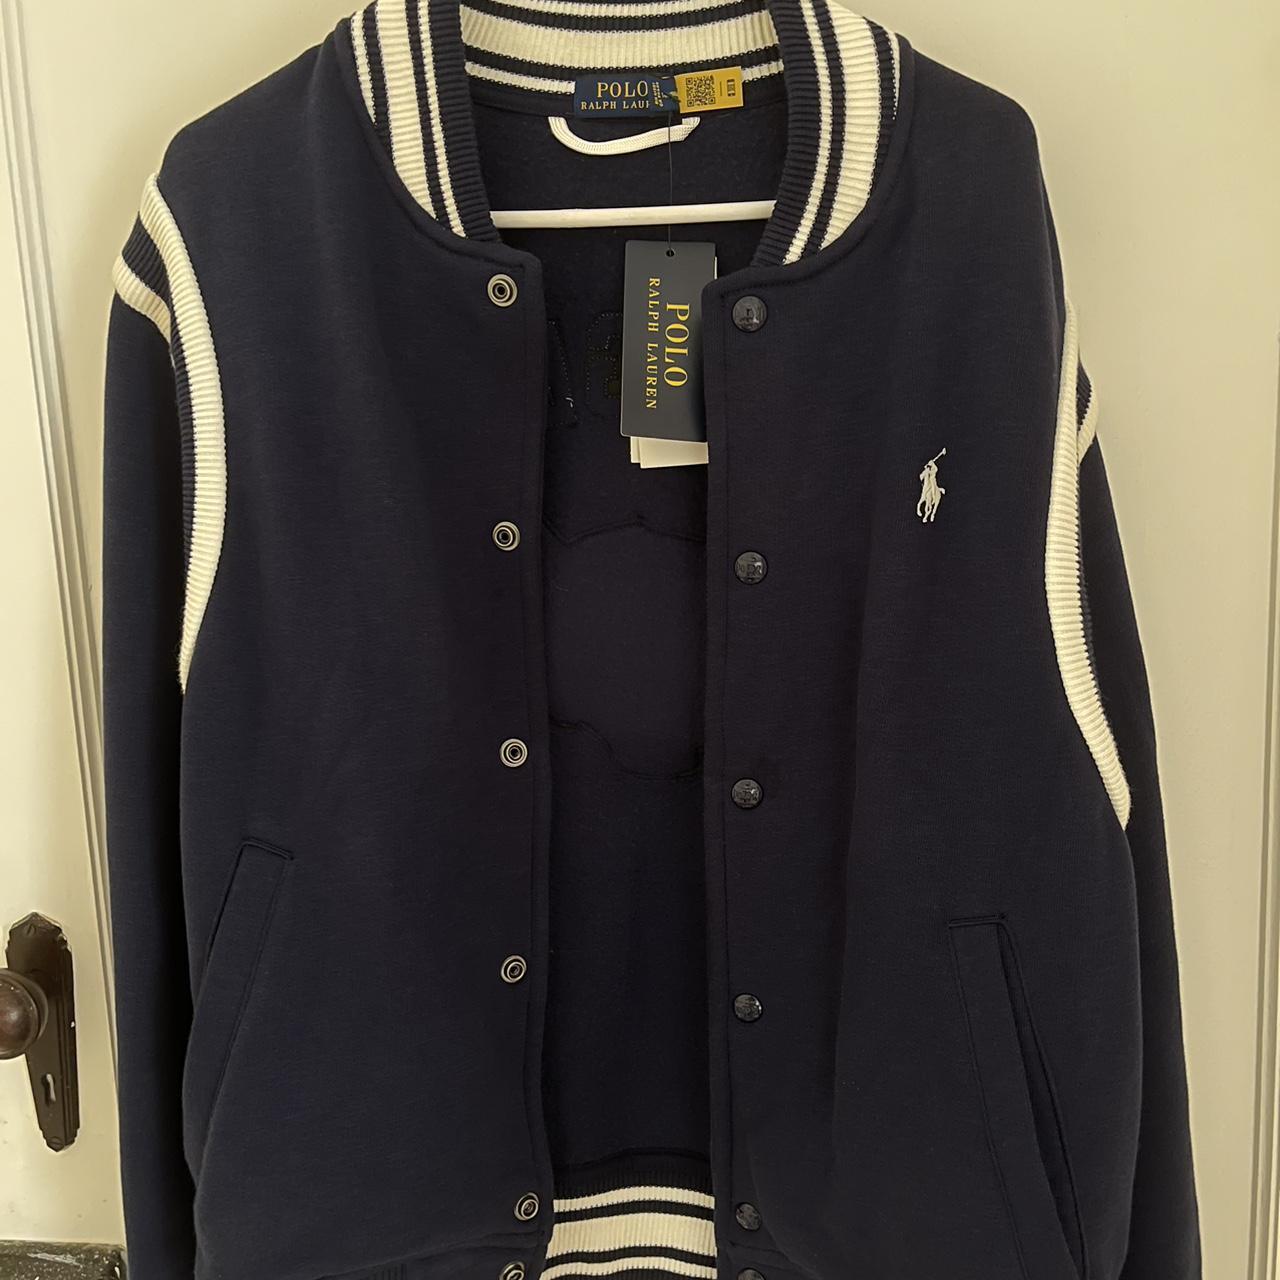 Polo ralph lauren jacket size S, new with tag - Depop